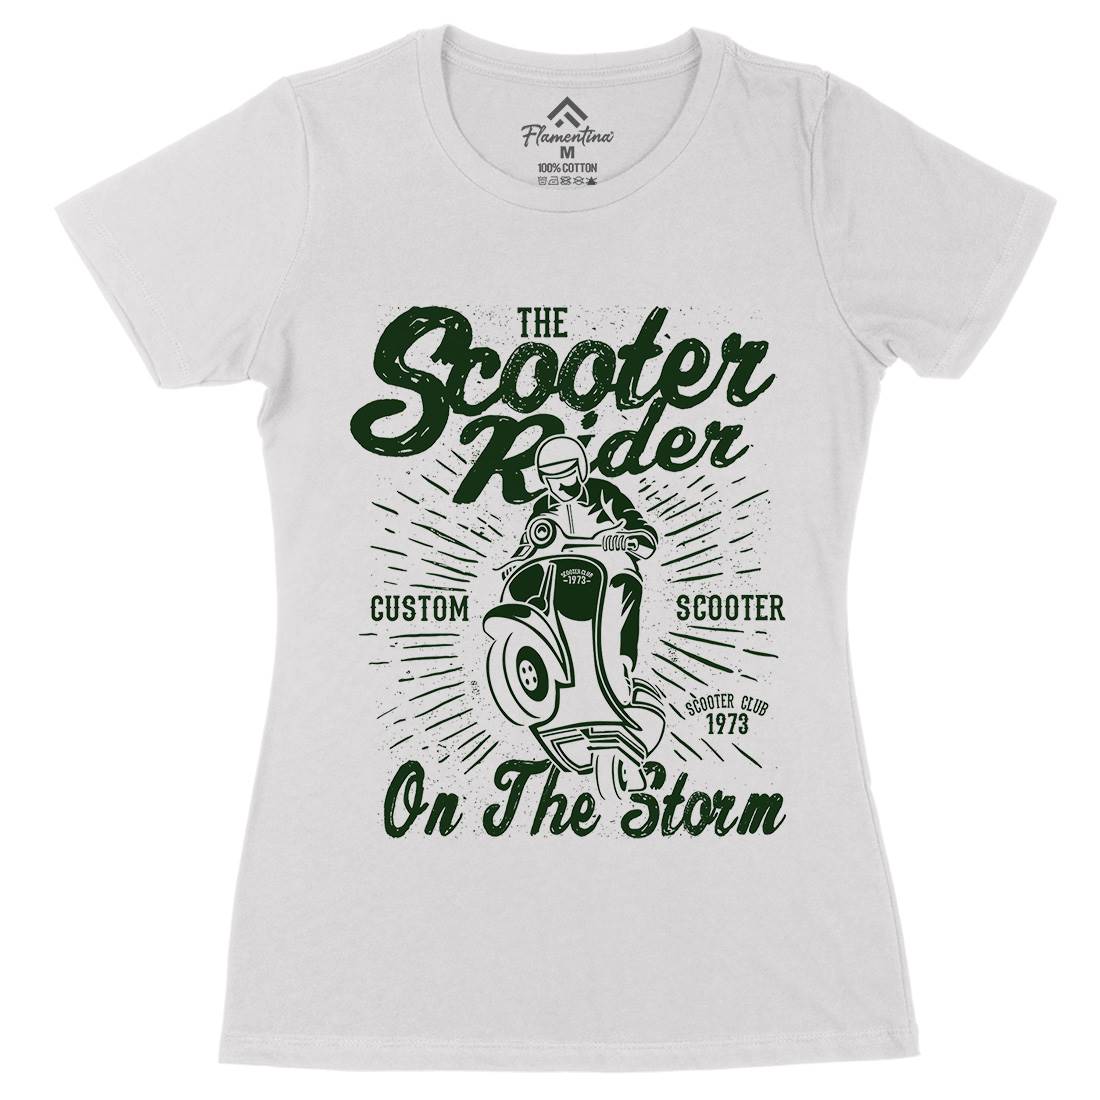 Scooter Rider Womens Organic Crew Neck T-Shirt Motorcycles A137